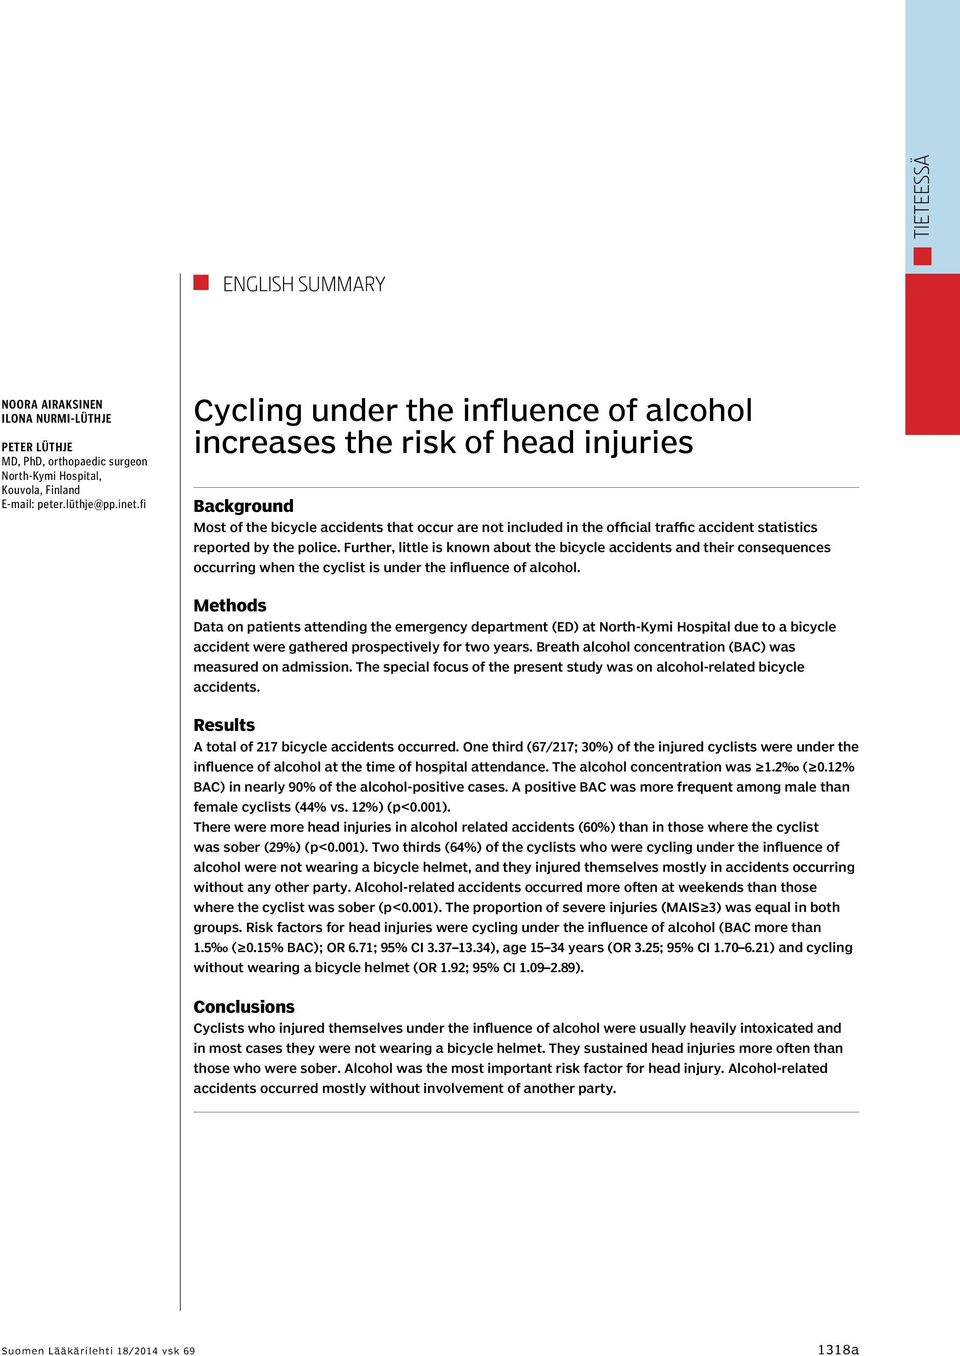 by the police. Further, little is known about the bicycle accidents and their consequences occurring when the cyclist is under the influence of alcohol.